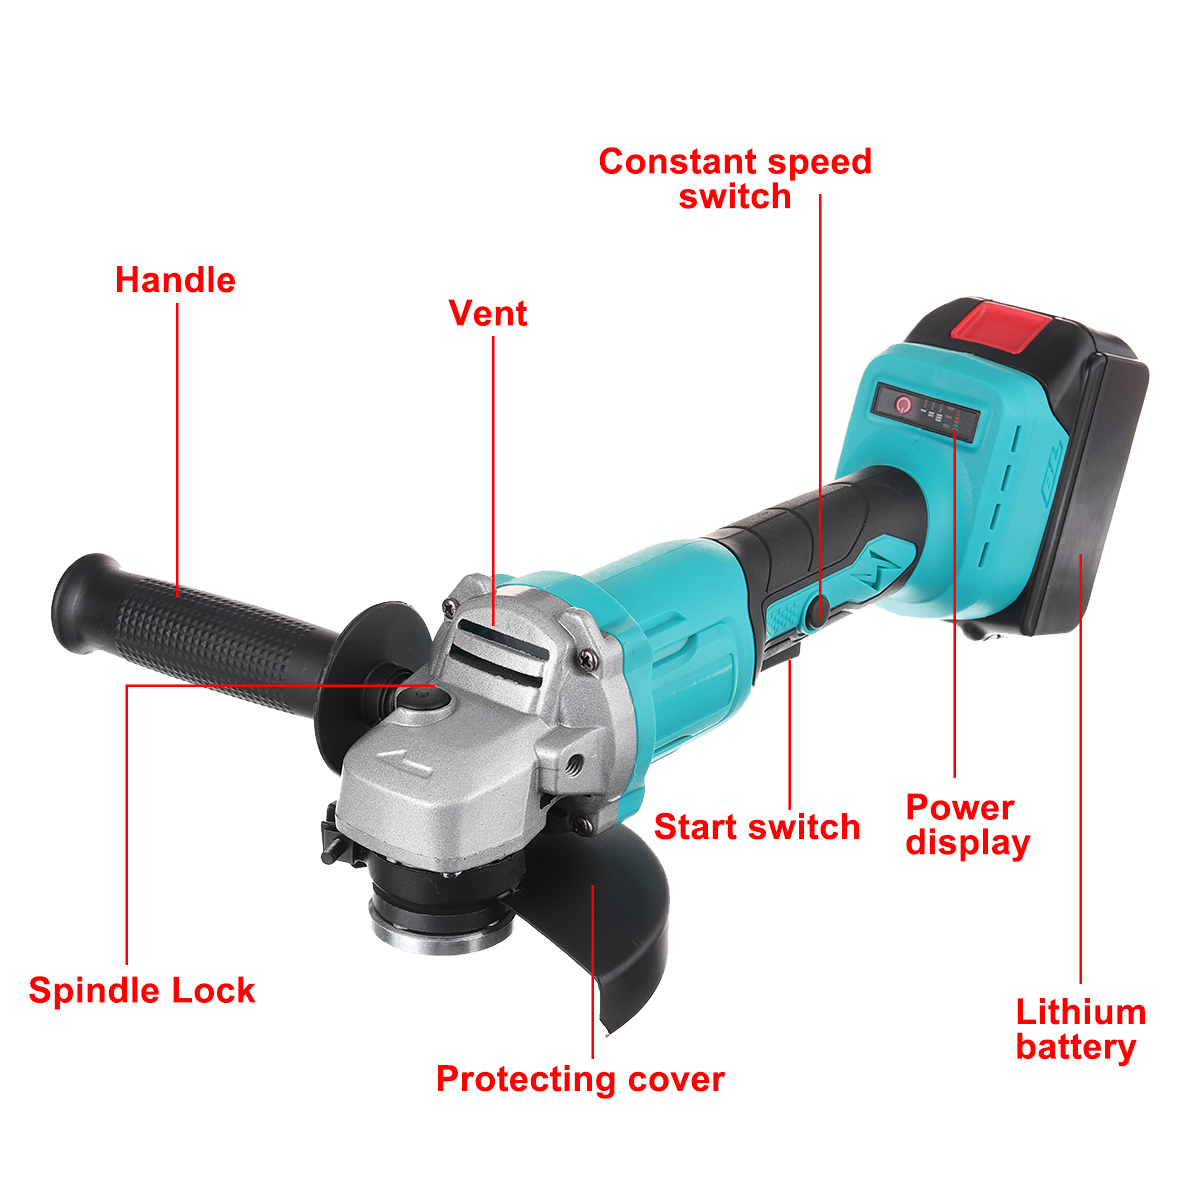 125mm18V-Cordless-Brushless-Angle-Grinder-Woodworking-Tool-For-Makita-Battery-1713408-12